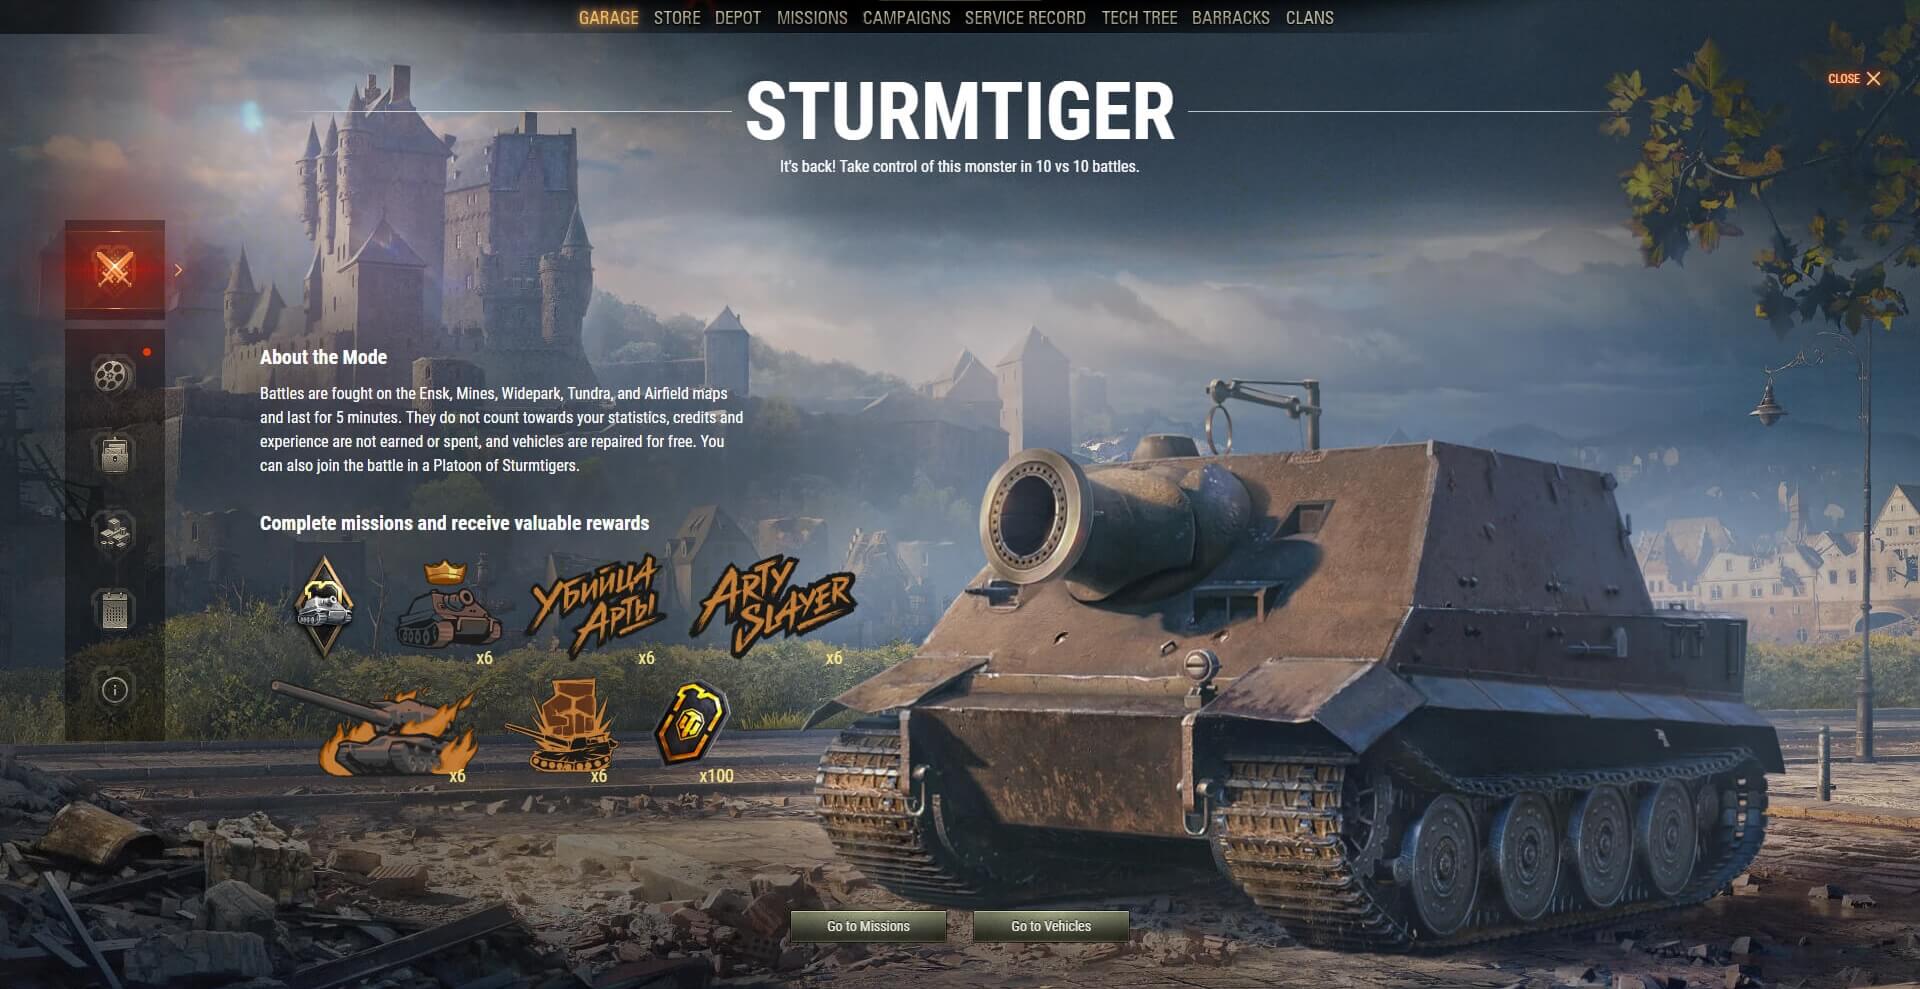 WoT Anniversary Act III. Tame the Crouching Sturmtiger! The Armored